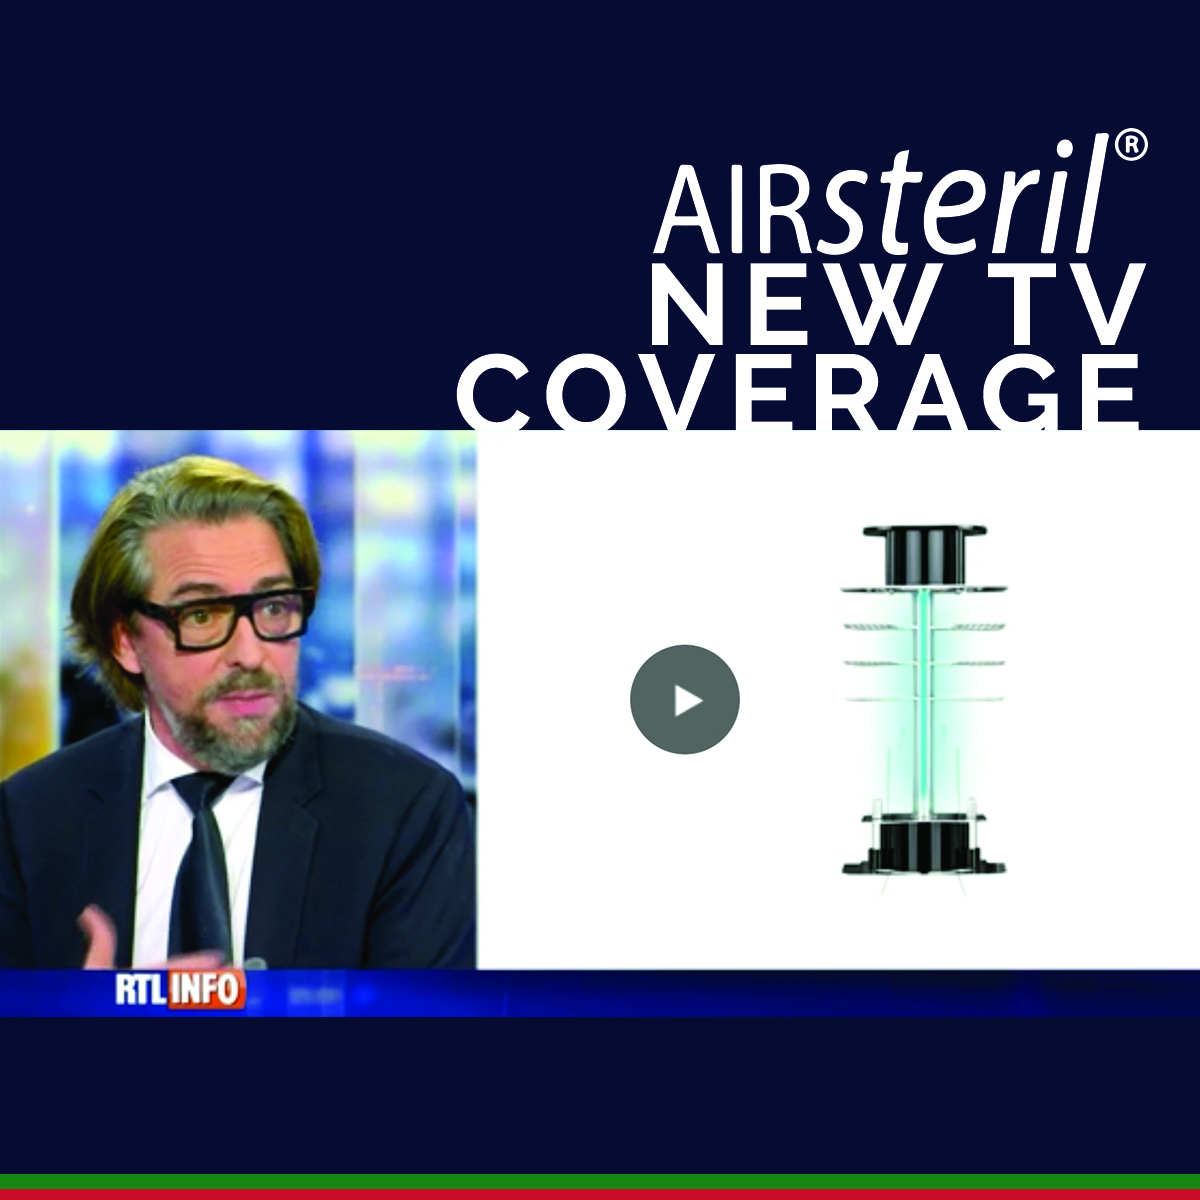 AIRsteril products have been a key part in the drive to reopen many businesses... video our latest TV covrage there youtube.com/watch?v=2K_Oyt… and more infomation can be found here daxairscience.co.uk/news-coronavir…
#daxairscience #tvcovrage #coronavirusrtltvcoverage #coronavirusnews